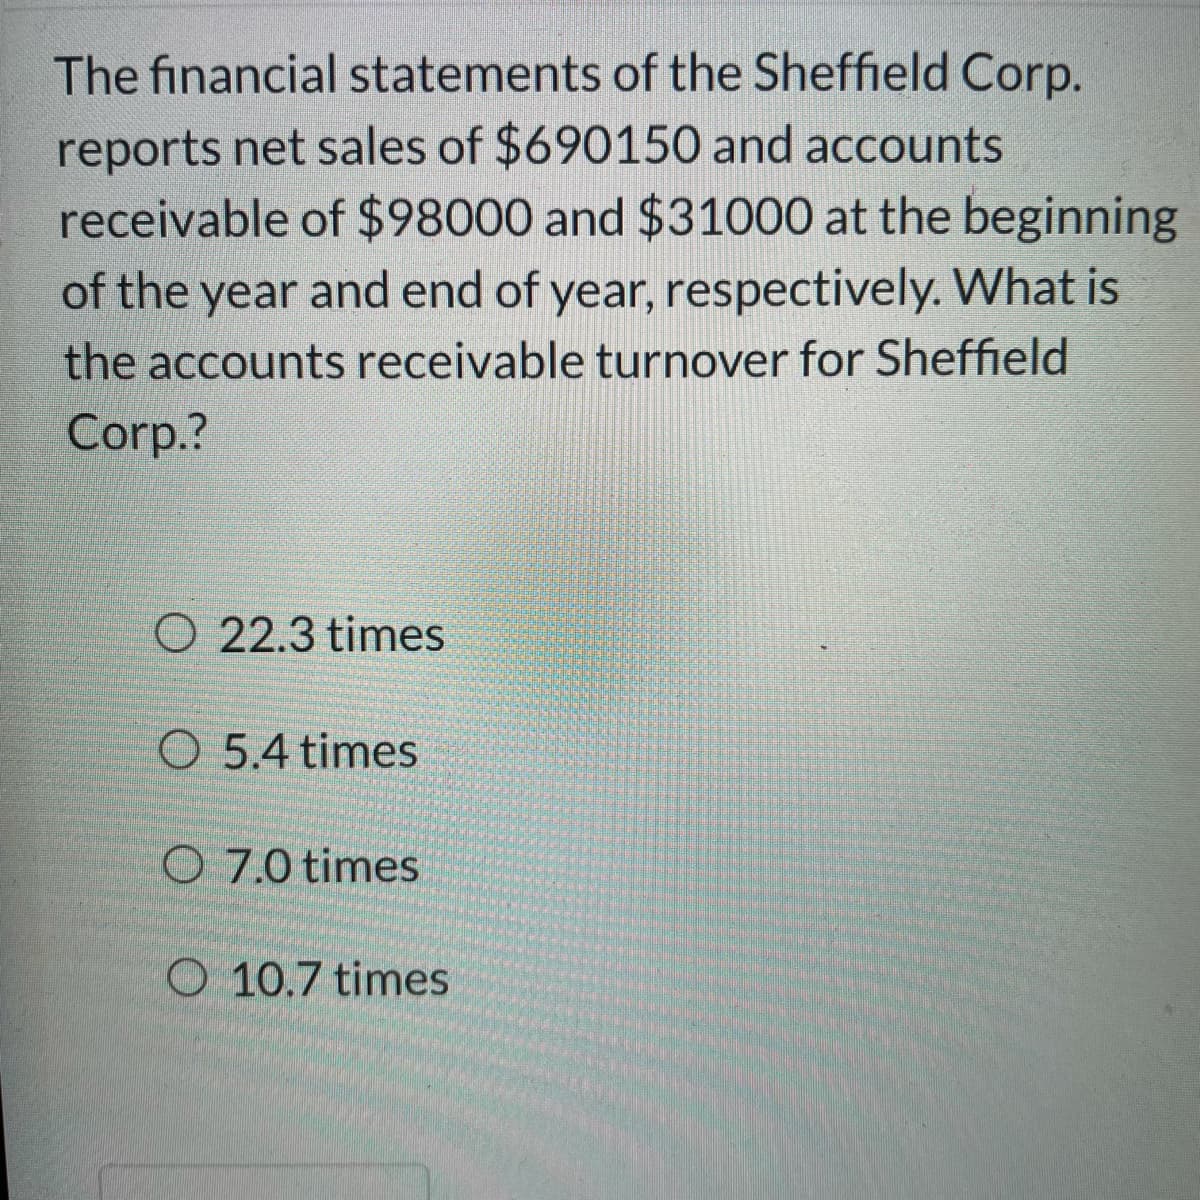 The financial statements of the Sheffield Corp.
reports net sales of $690150 and accounts
receivable of $98000 and $31000 at the beginning
of the year and end of year, respectively. What is
the accounts receivable turnover for Sheffield
Corp.?
O 22.3 times
O 5.4 times
O 7.0 times
O 10.7 times
